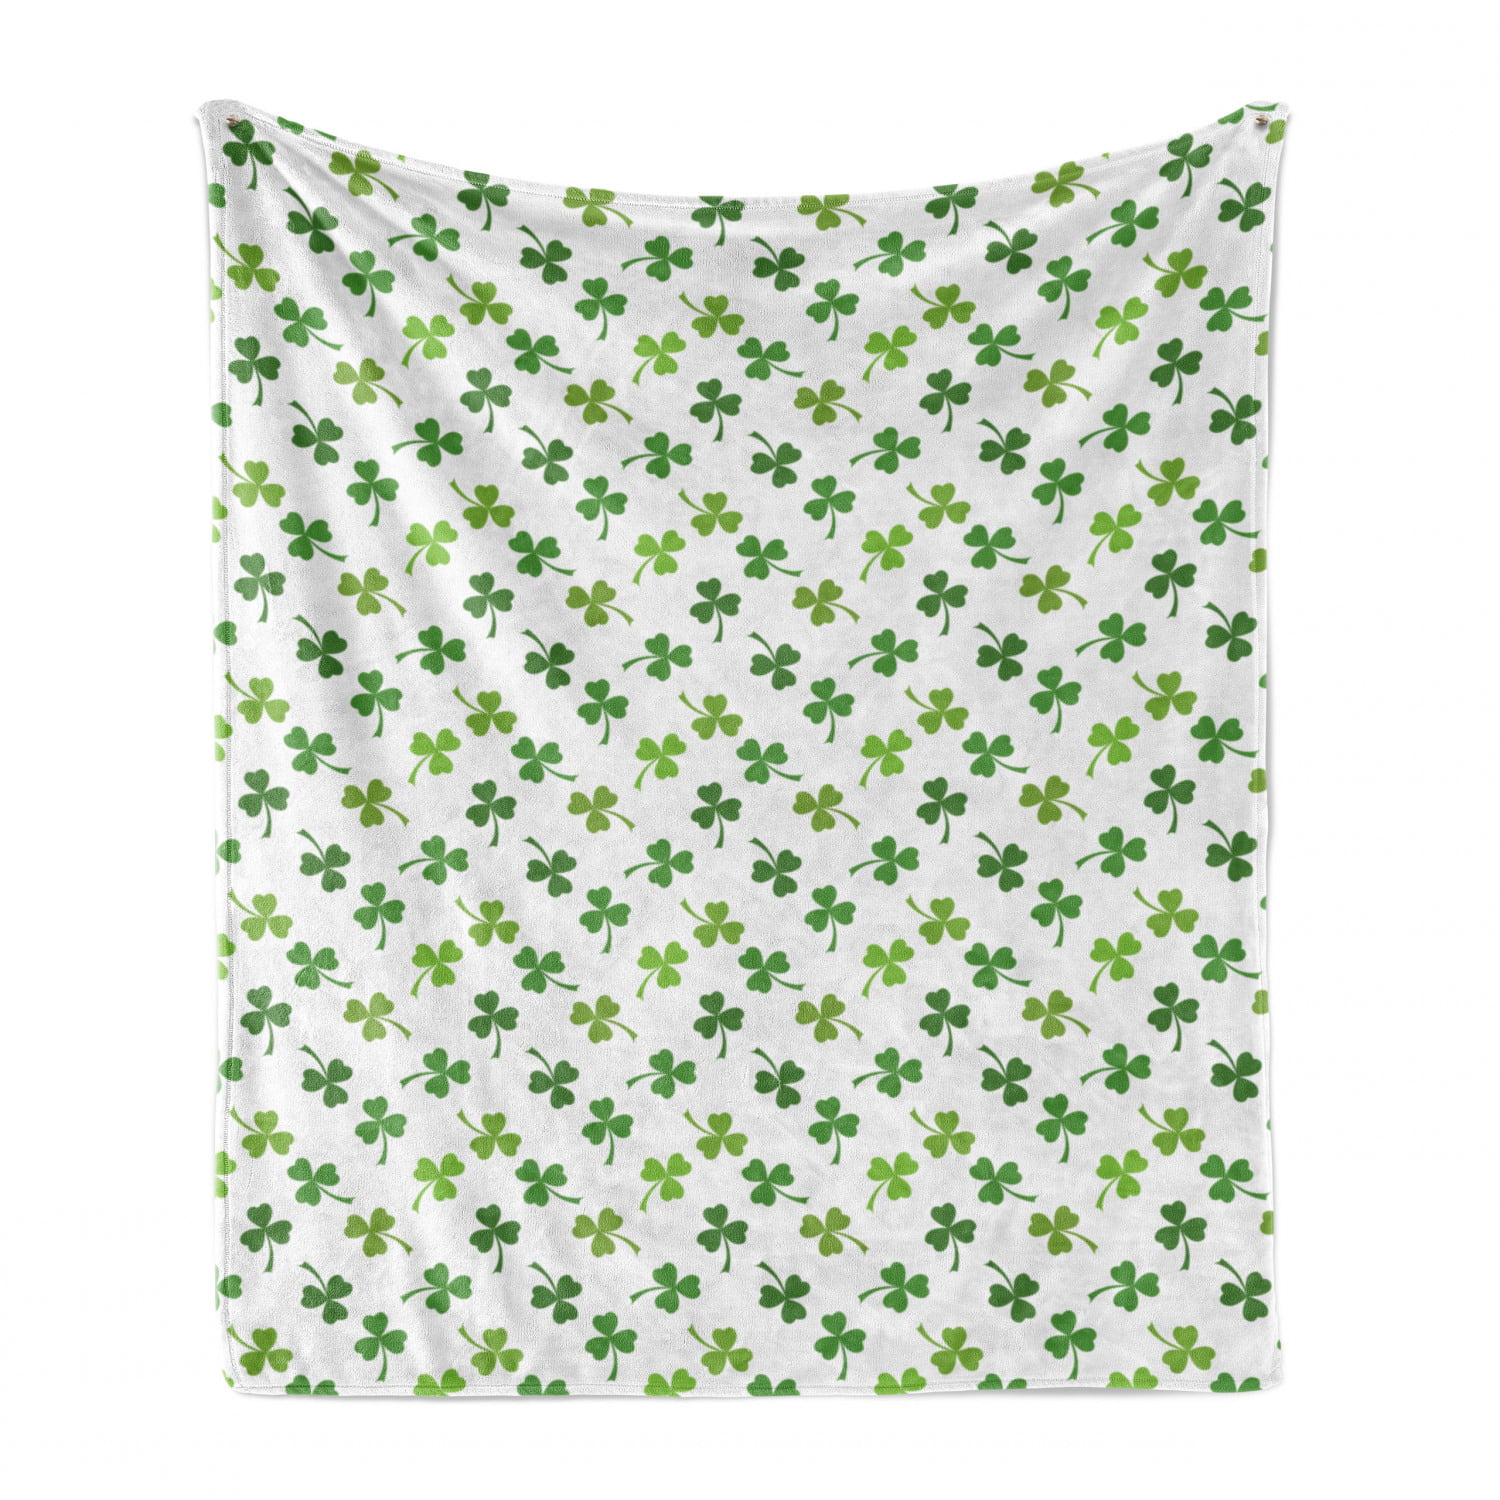 Luckybunny Fleece Throw Blanket St.Patrick's Day Clover Soft Cozy Flannel Fleece Blanket Warm and Lightweight Blankets for Couch Sofa Bed Camping Travel Office Gift 50x60